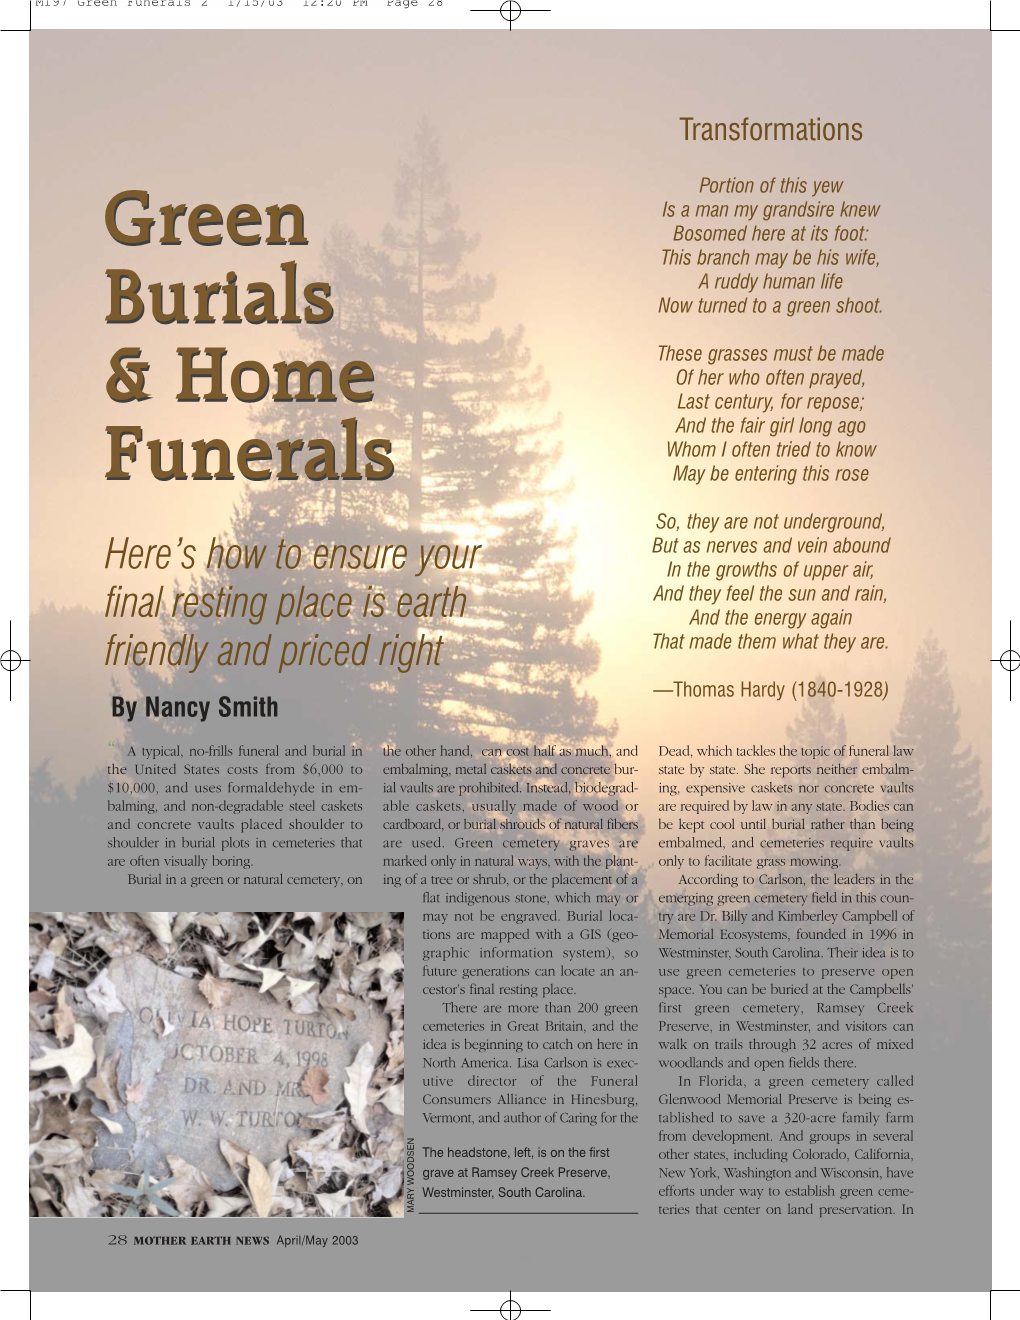 M197 Green Funerals 2 1/15/03 12:20 PM Page 28